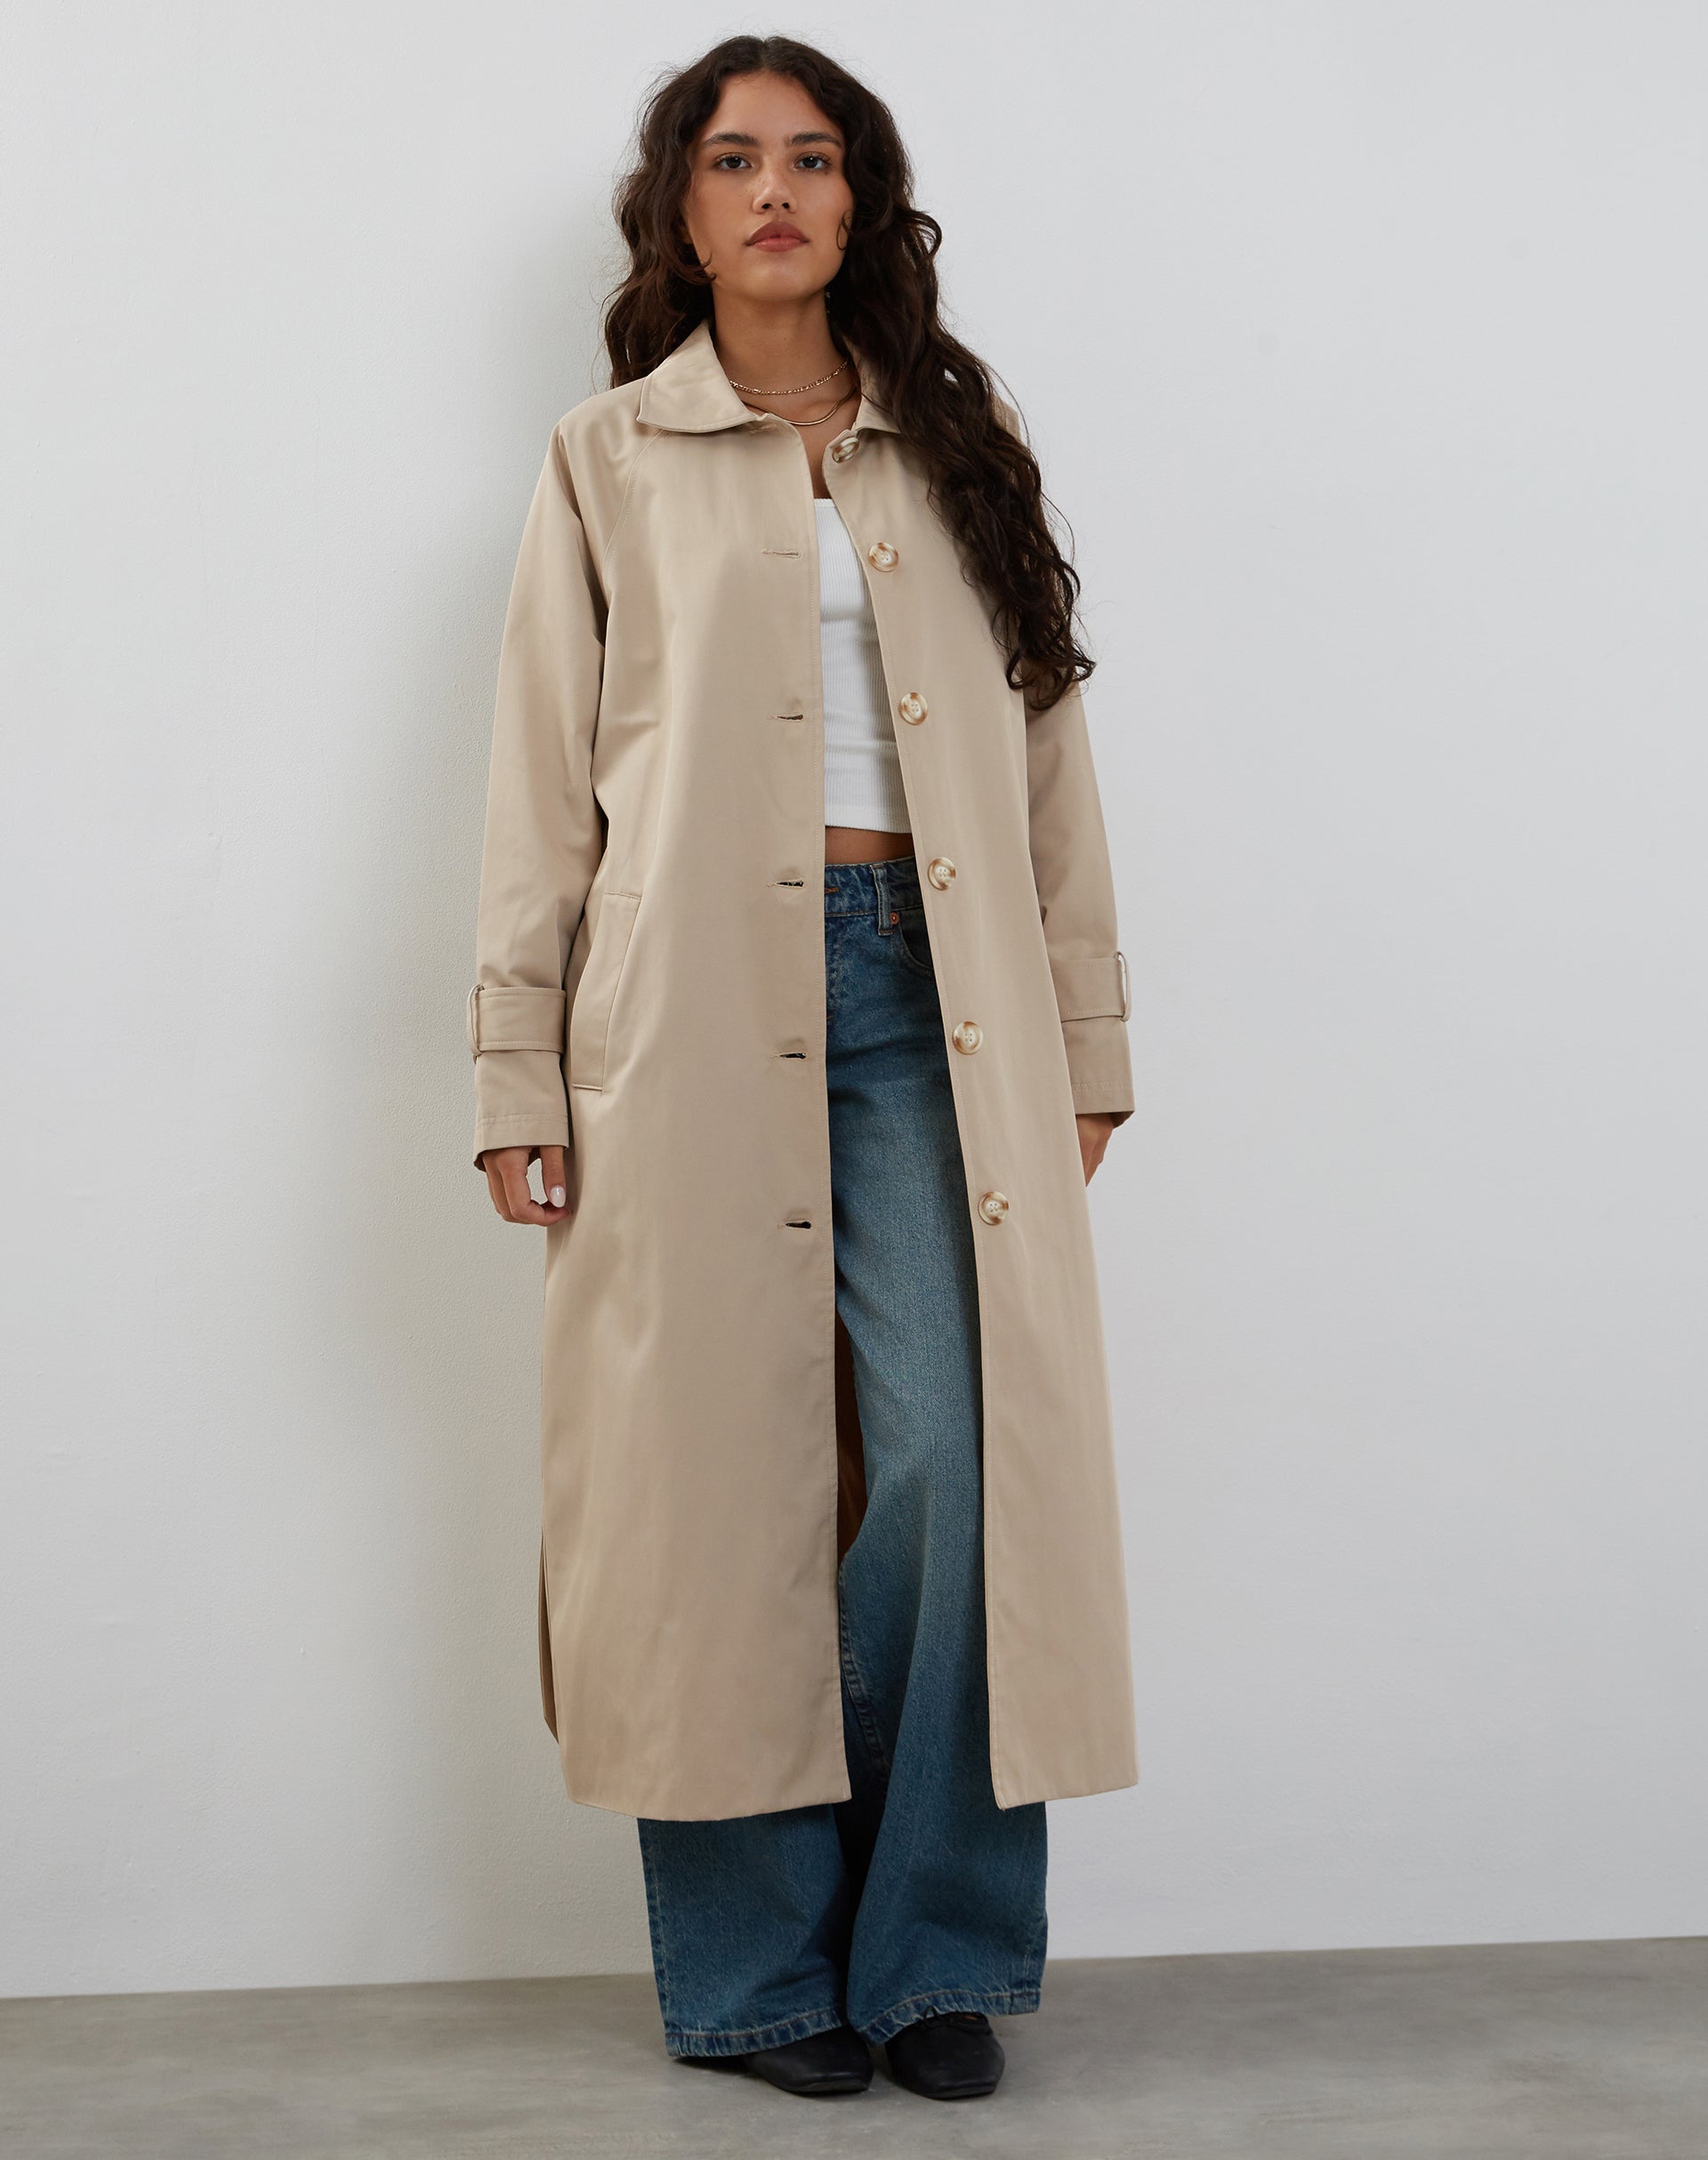 Image of Panala Trench Coat in Sand